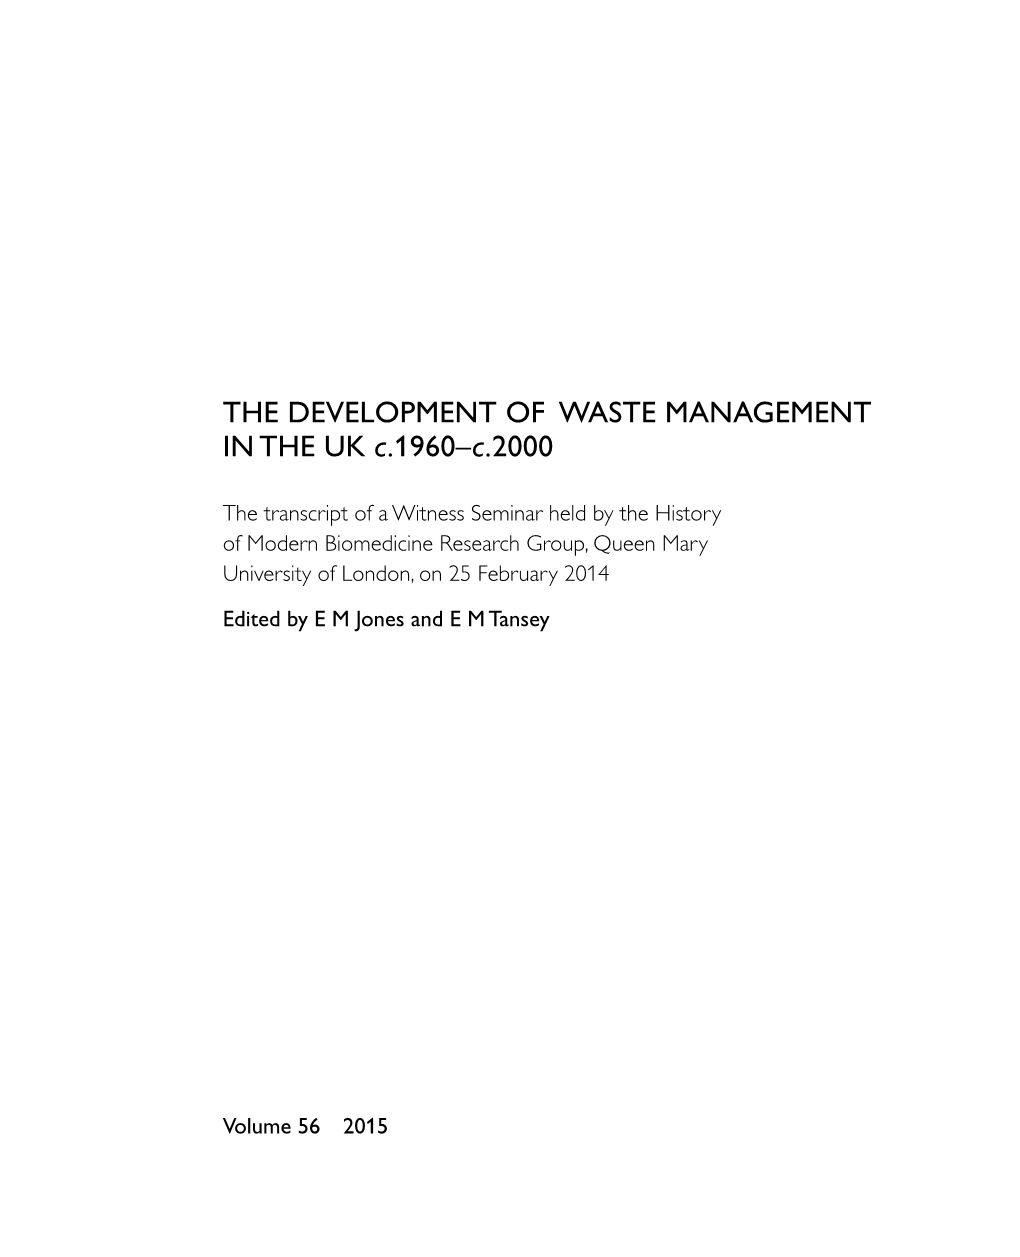 THE DEVELOPMENT of WASTE MANAGEMENT in the UK C.1960–C.2000